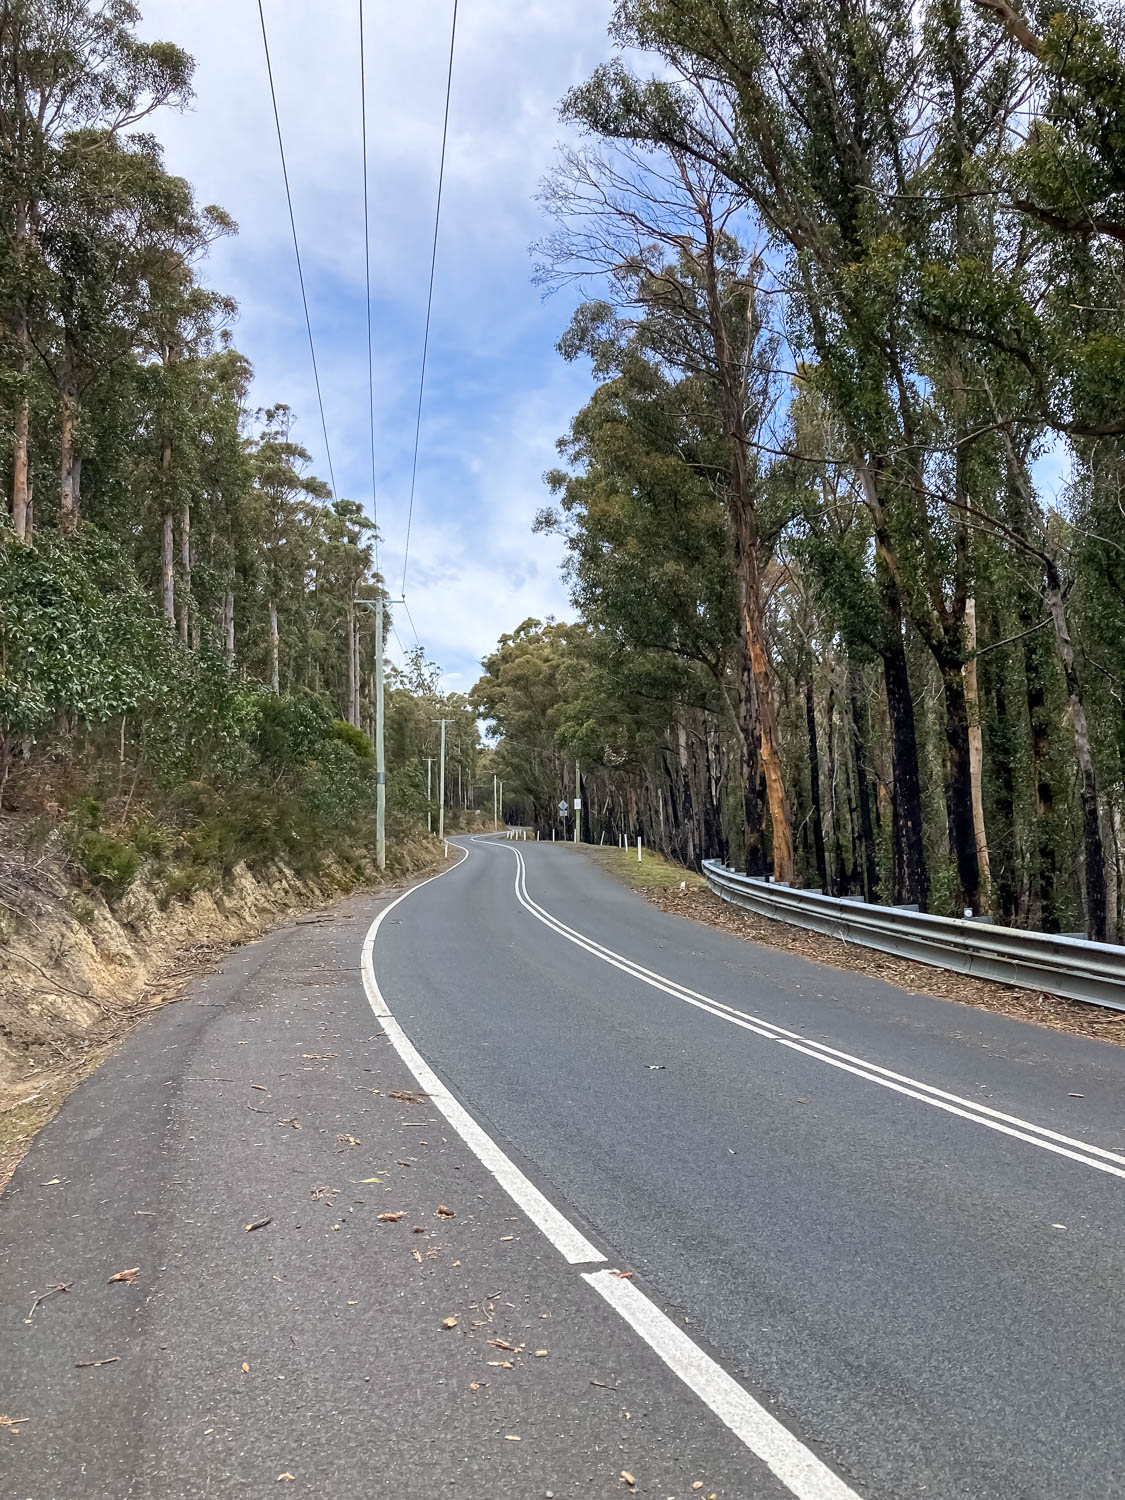 A road passing through thin gum trees on either side